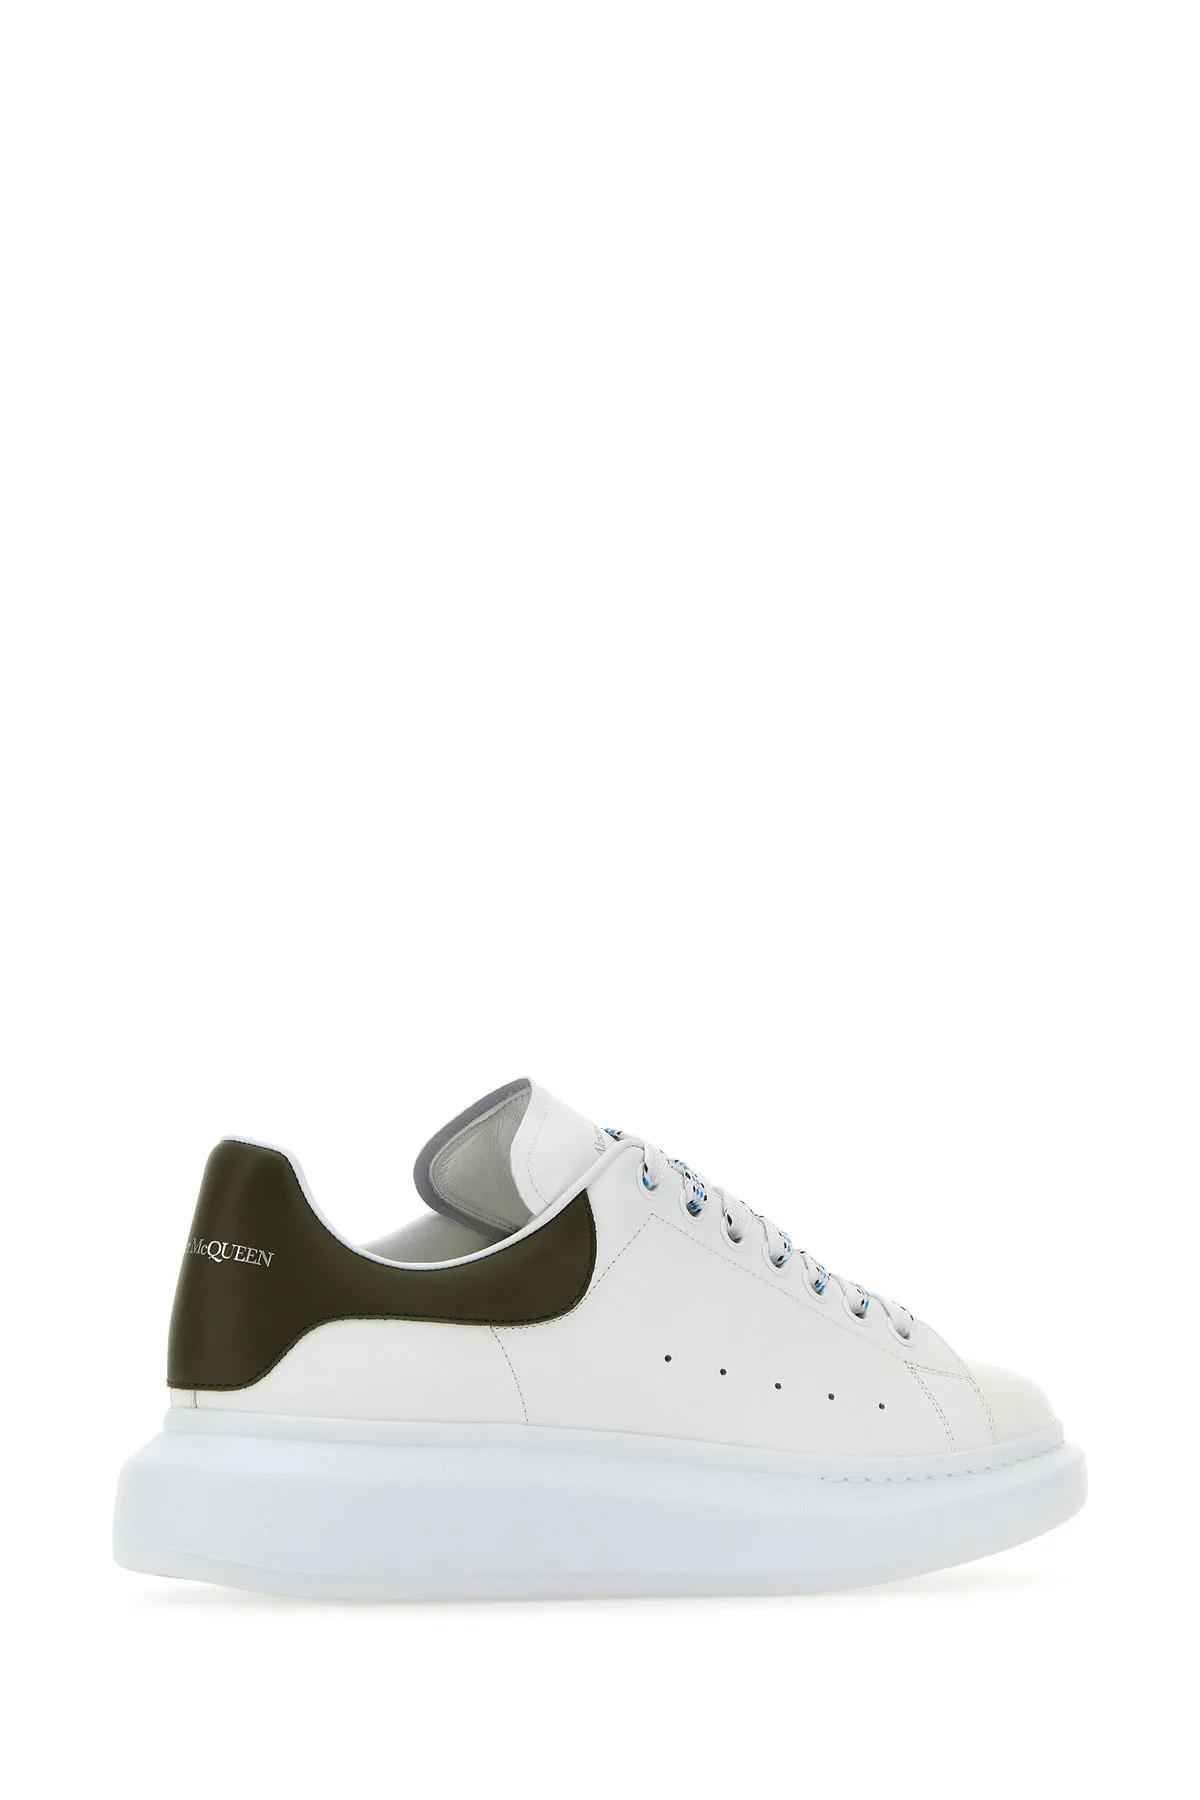 Shop Alexander Mcqueen White Leather Sneakers With Army Green Leather Heel